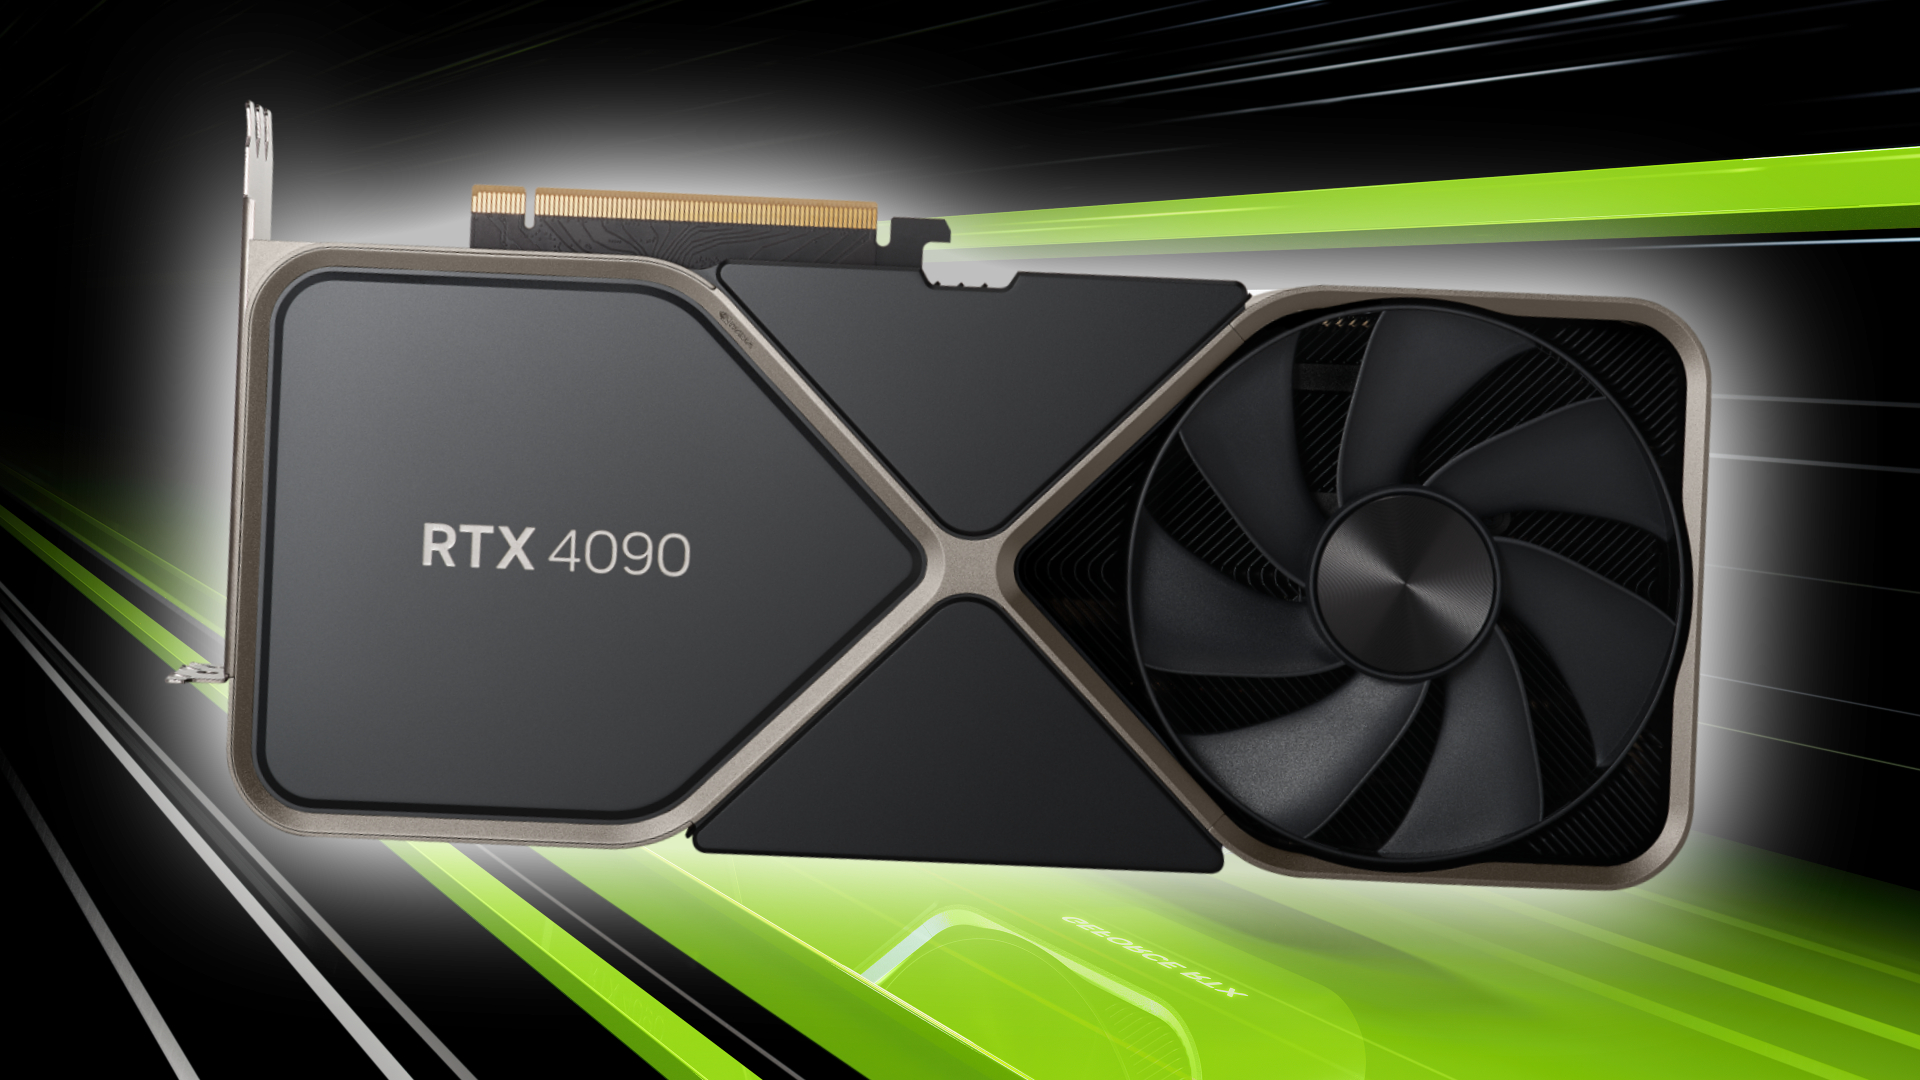 Nvidia RTX 4090 and RTX 4080 GPUs are now officially a thing